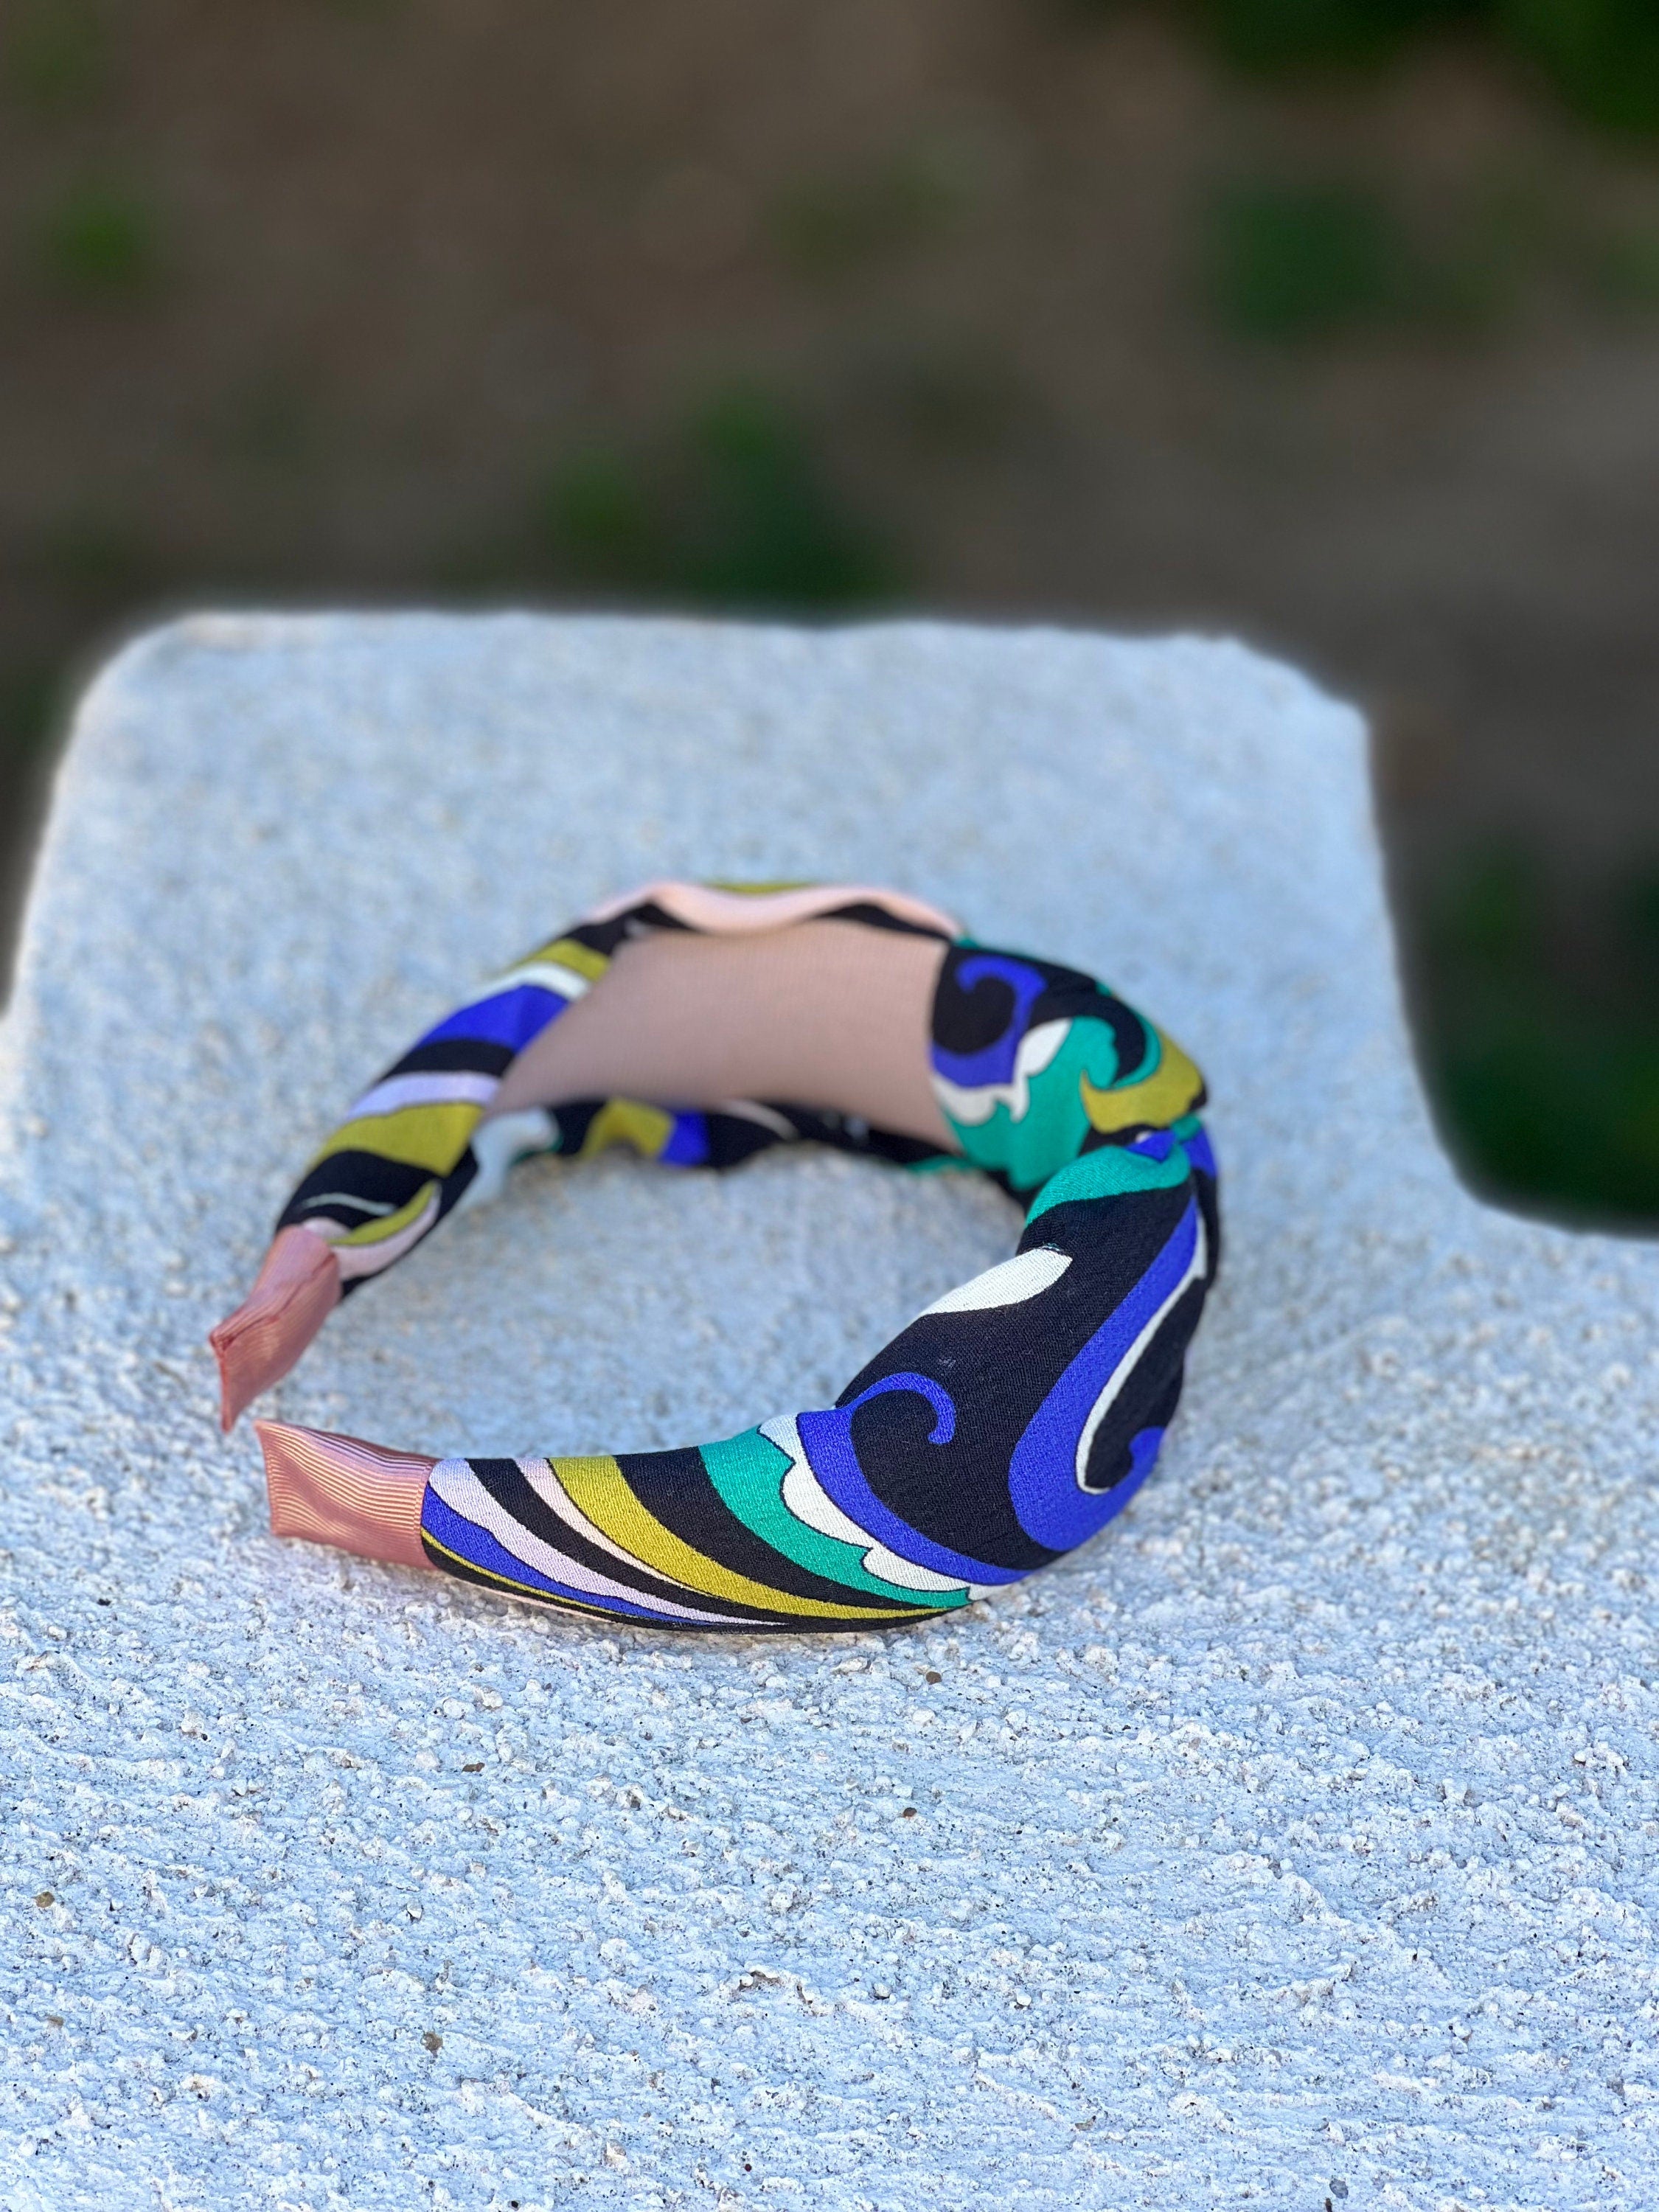 Stay stylish and comfortable all year round with our Headband for All Seasons. This hairband features a unique black, white, blue, and green color combination.